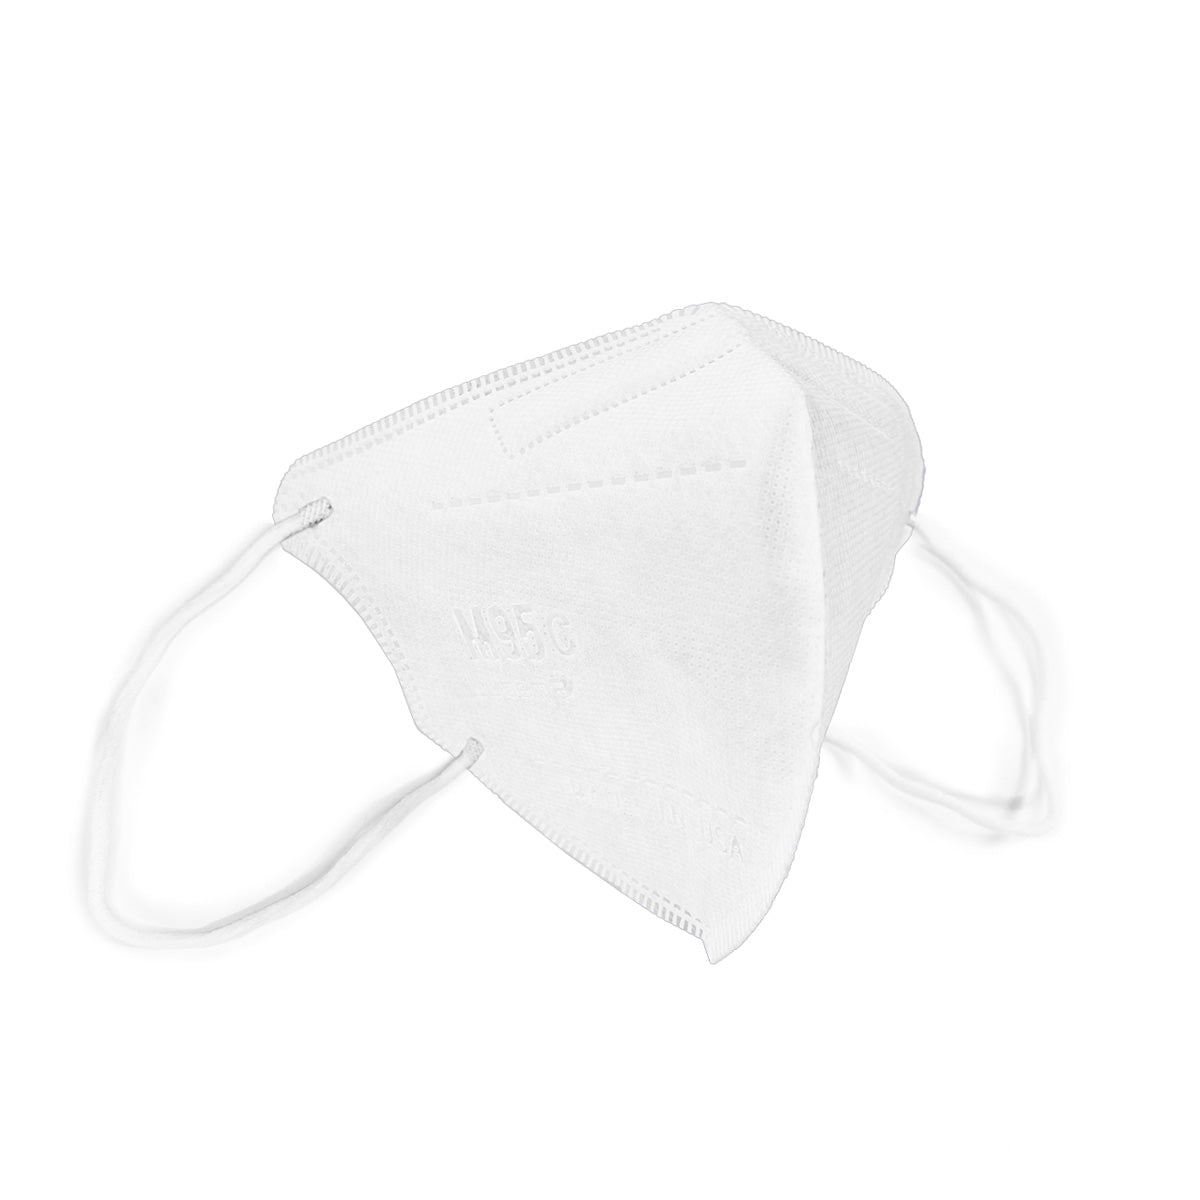 M95c:  child size American-made KN95, Premium 5-Layer ASTM Level-3 Mask (5 Pack)